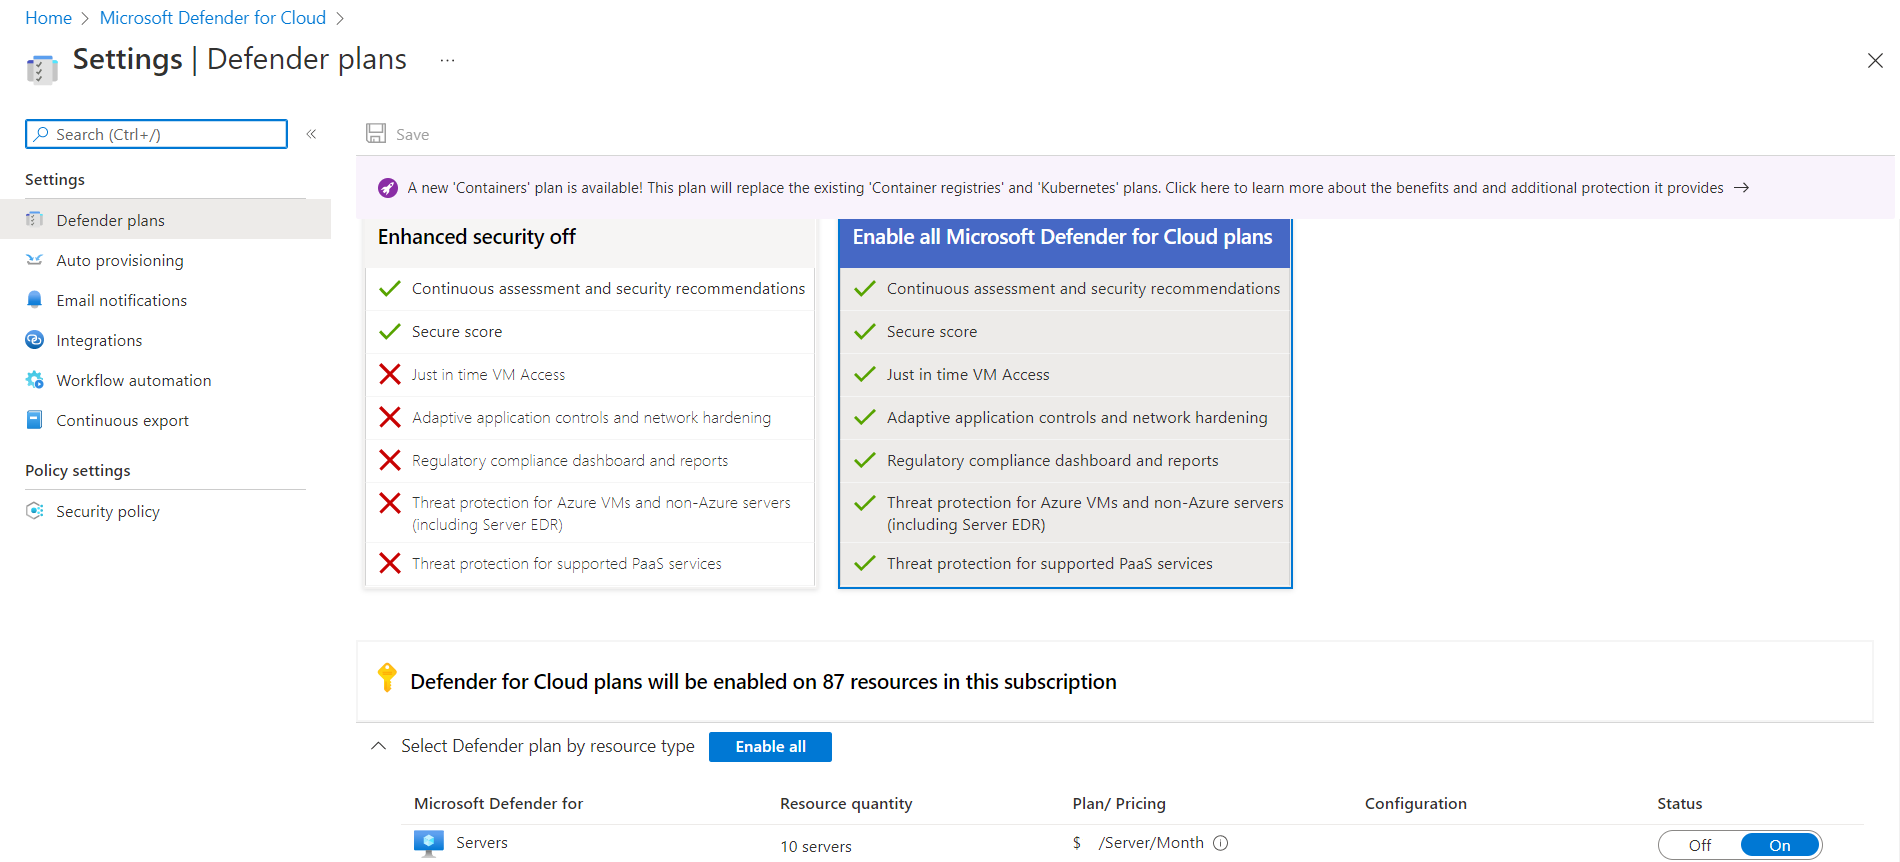 Screenshot that shows the Defender plans pane with the Defender for Cloud plans enabled.